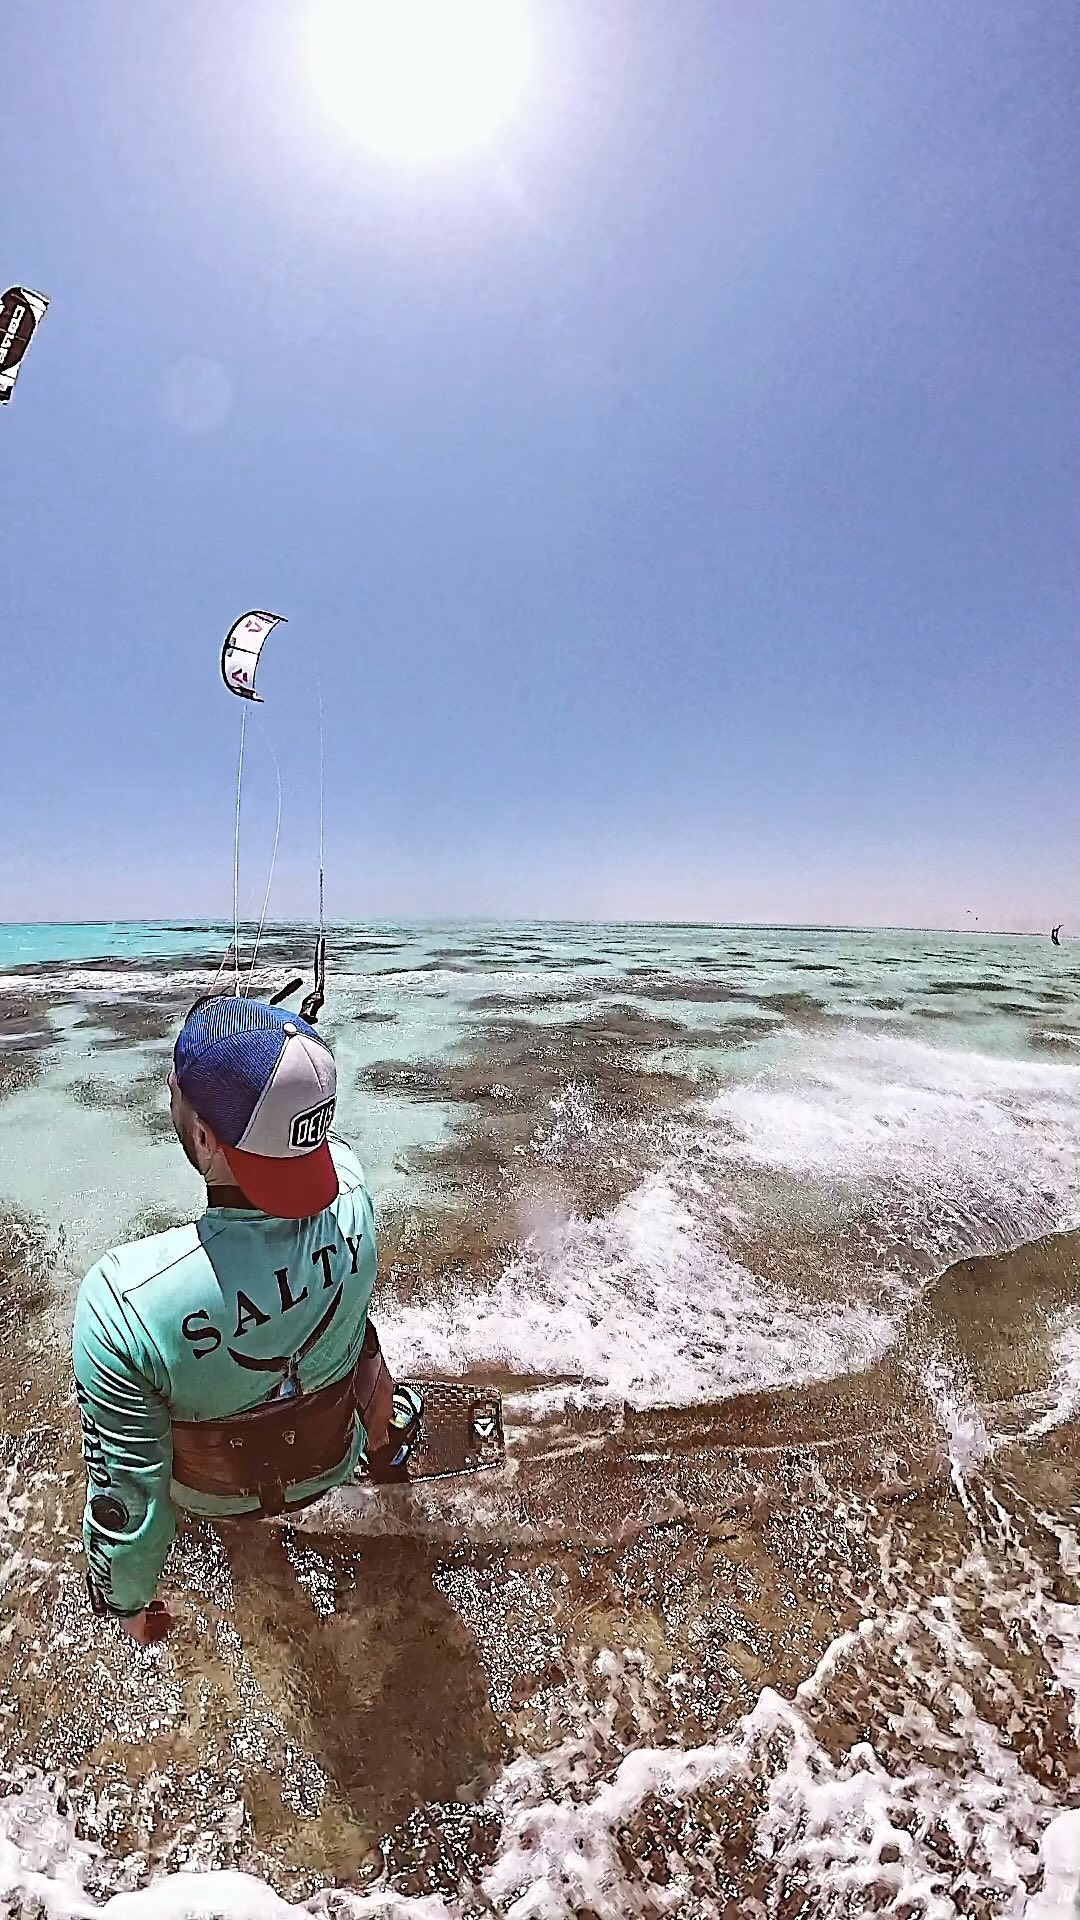 [ thank’s for kiting with us ]
🤙
@osmosis_kiteboarding